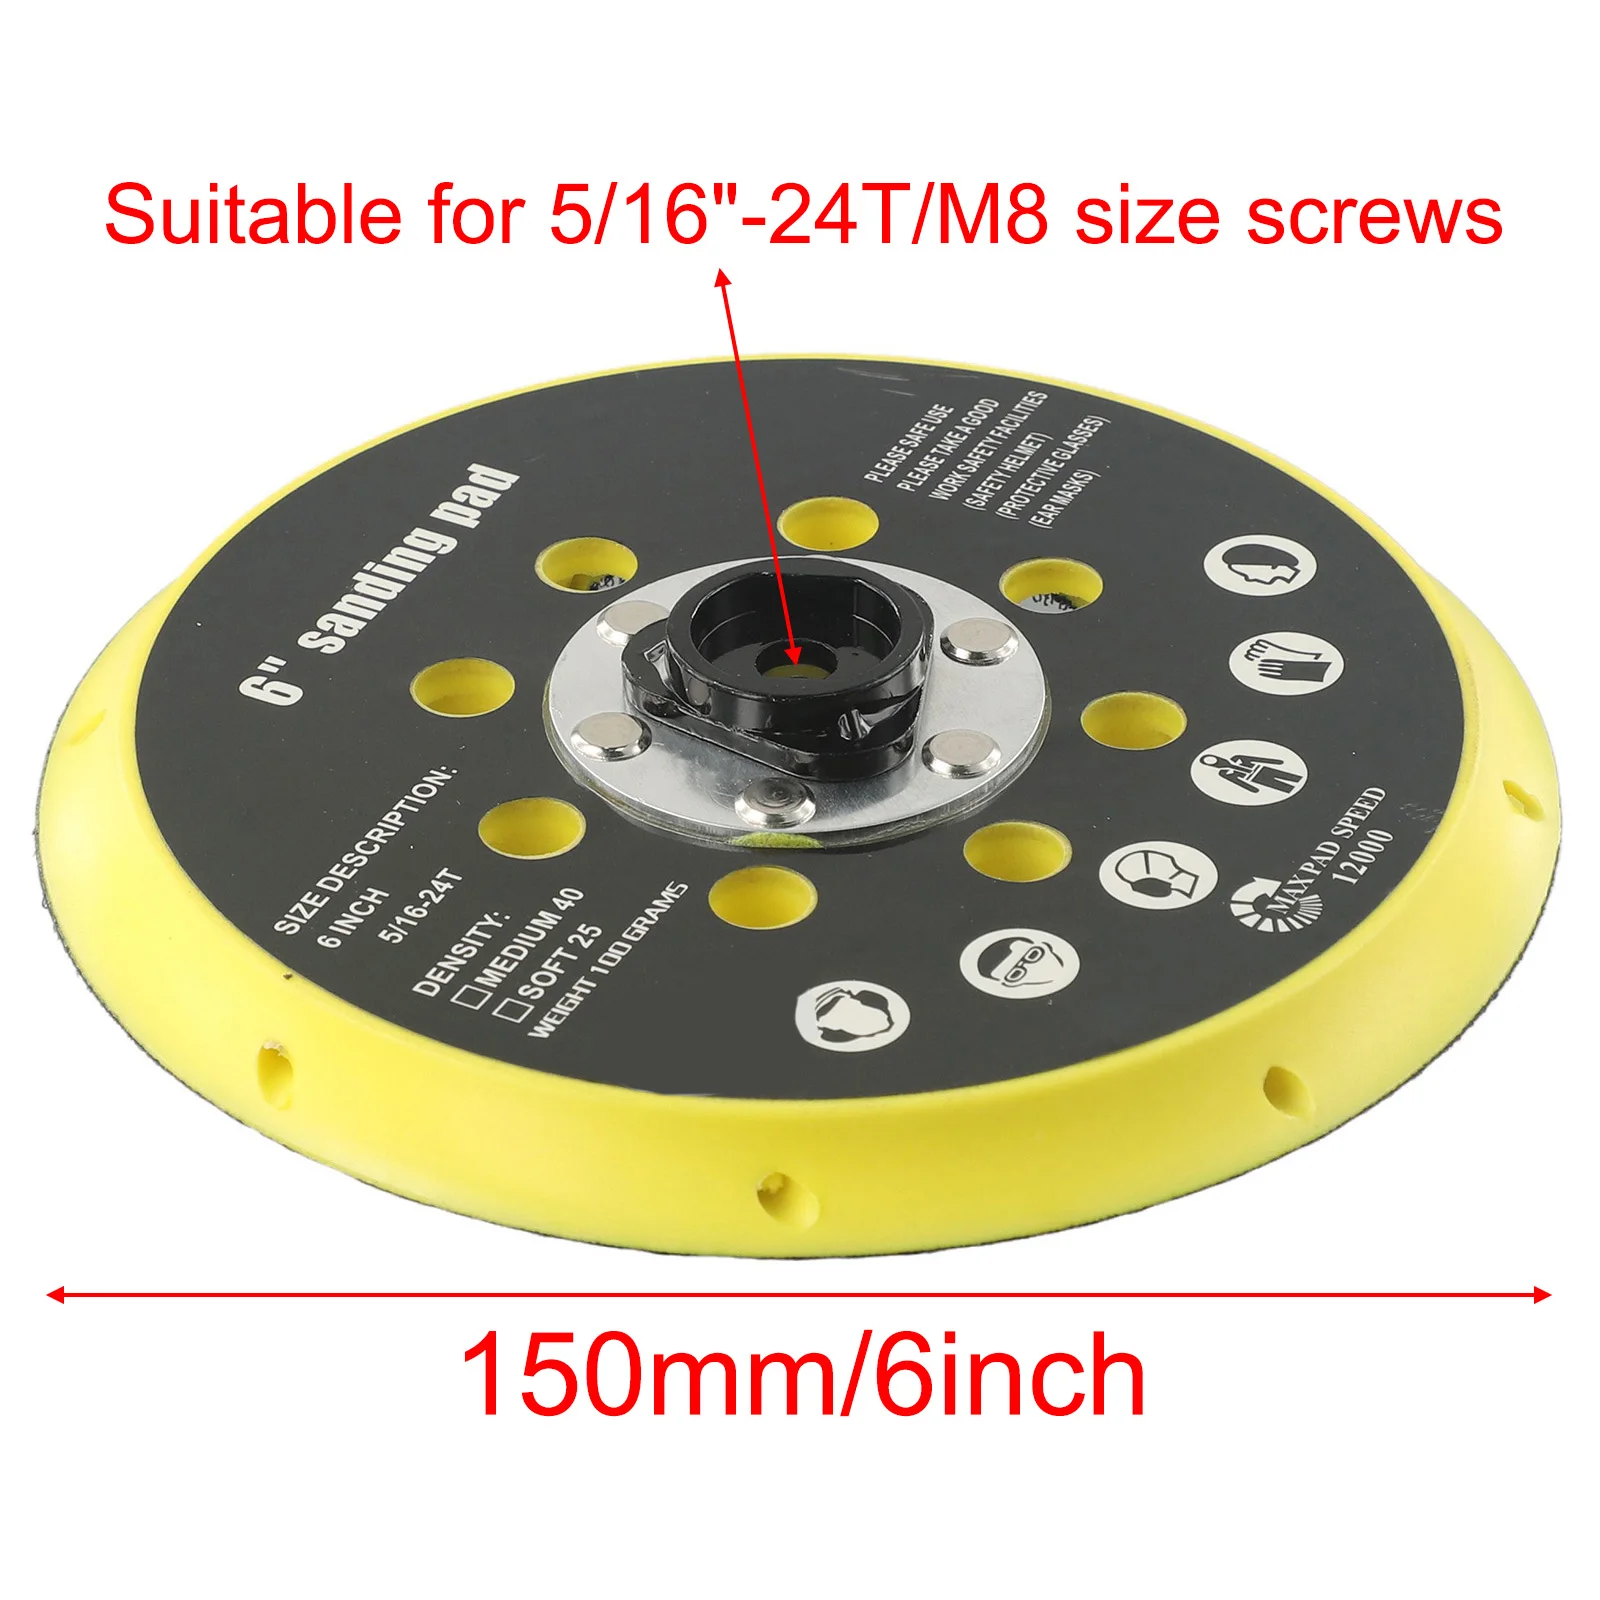 6 Inch 150mm Sanding Pad Sander Backing Pad 17 Holes For Festool BO6030 BO6040 Sander Power Tools Accessories 5 8 holes sanding pad assemblies fit backing is much better than plastic backings it is harder and more difficult to be broken